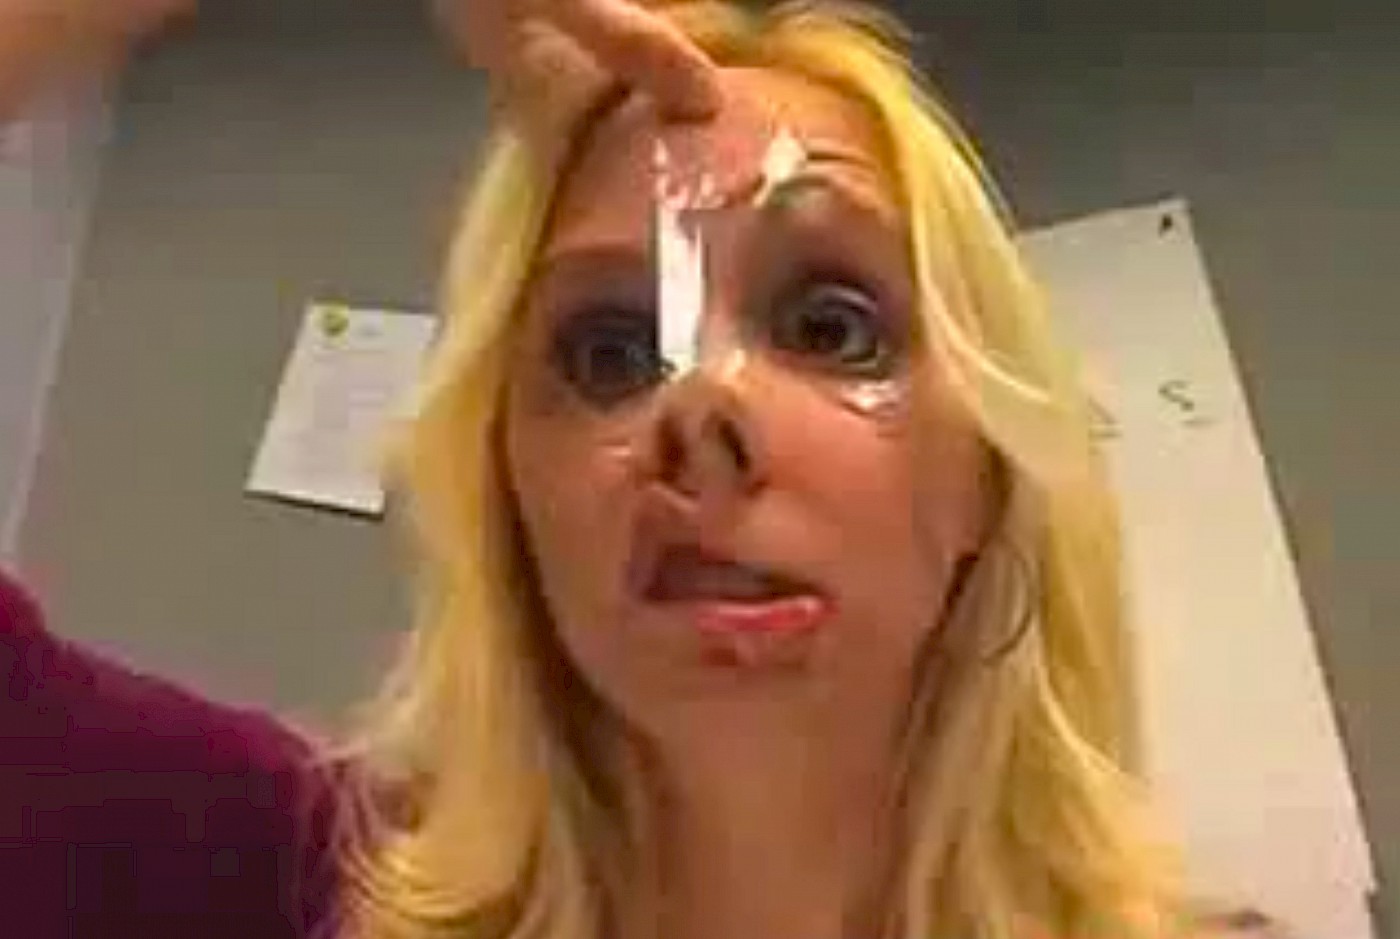 [Pretty Blond Girl Is Bored At Work](https://youtu.be/5qBTtvgRpBI)